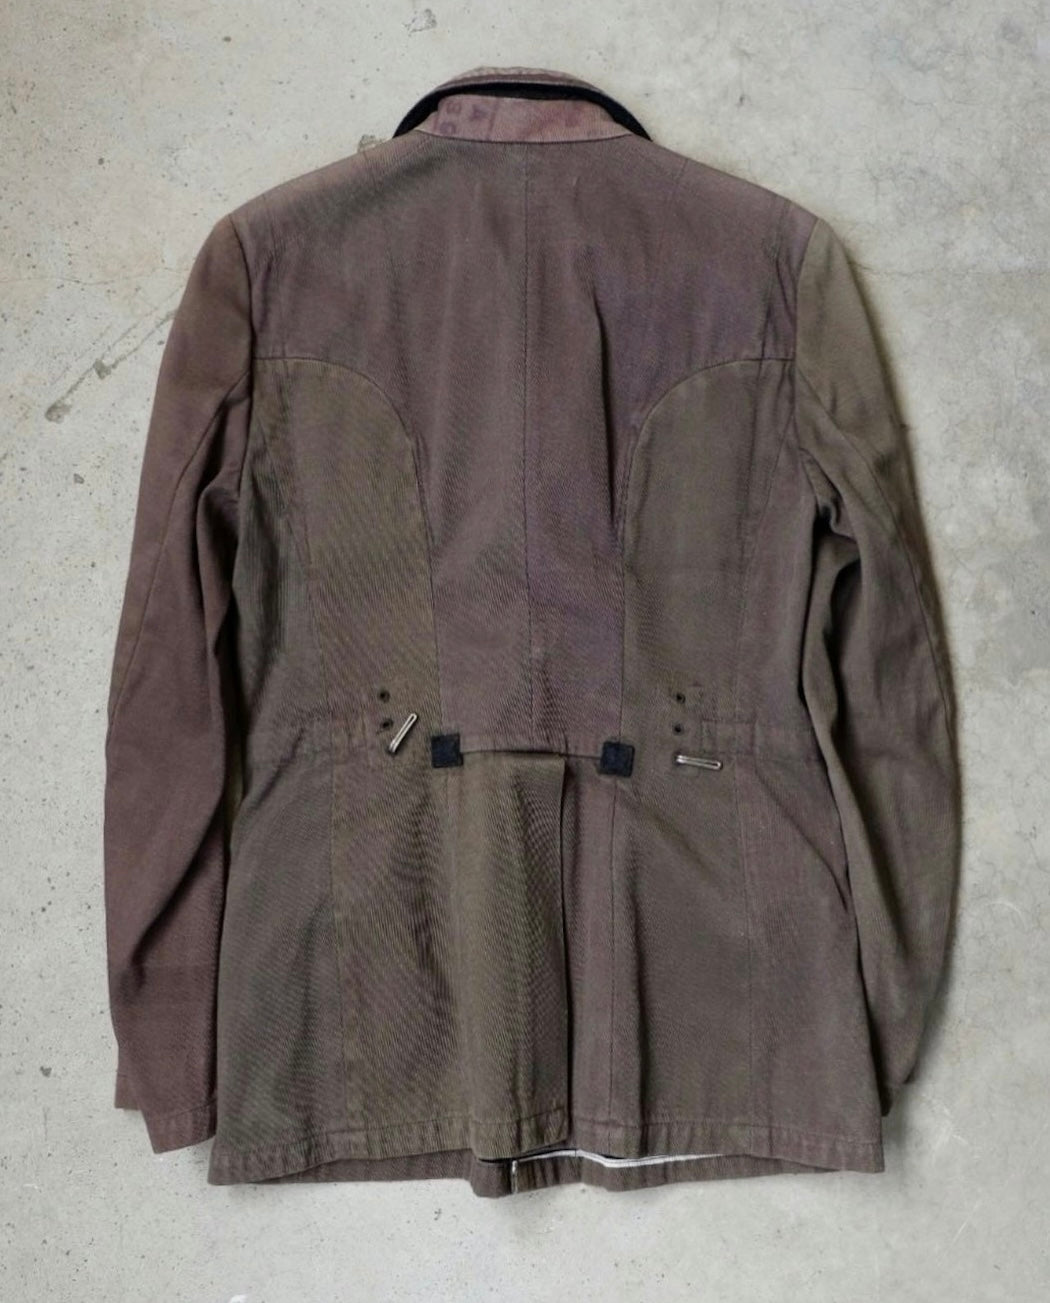 Connecters Early 2000’s “WWII” Military Jacket